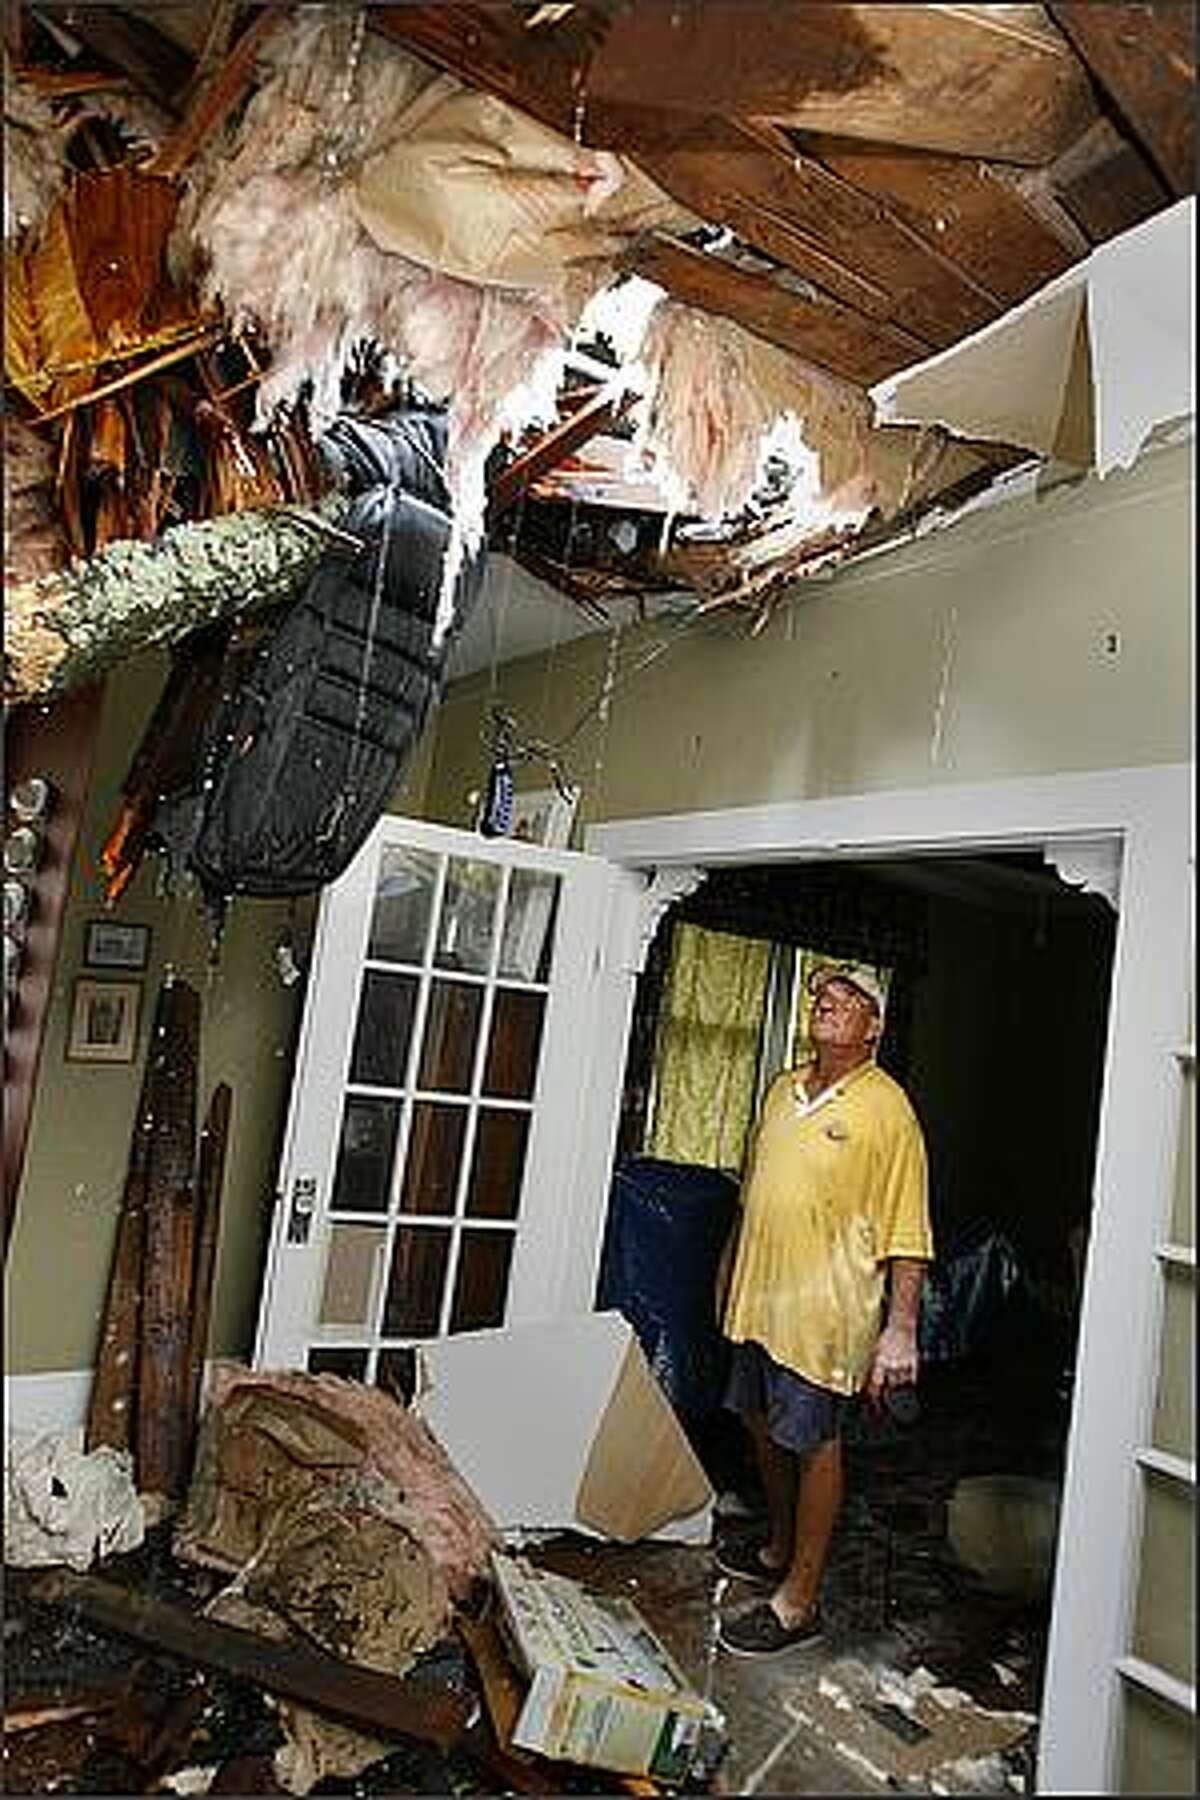 Richard Bezet looks over damage to the living room of his Baton Rouge, La., home after a tree fell through the roof due to winds from Hurricane Gustav. Kathy Anderson/AP/The Times-Picayune